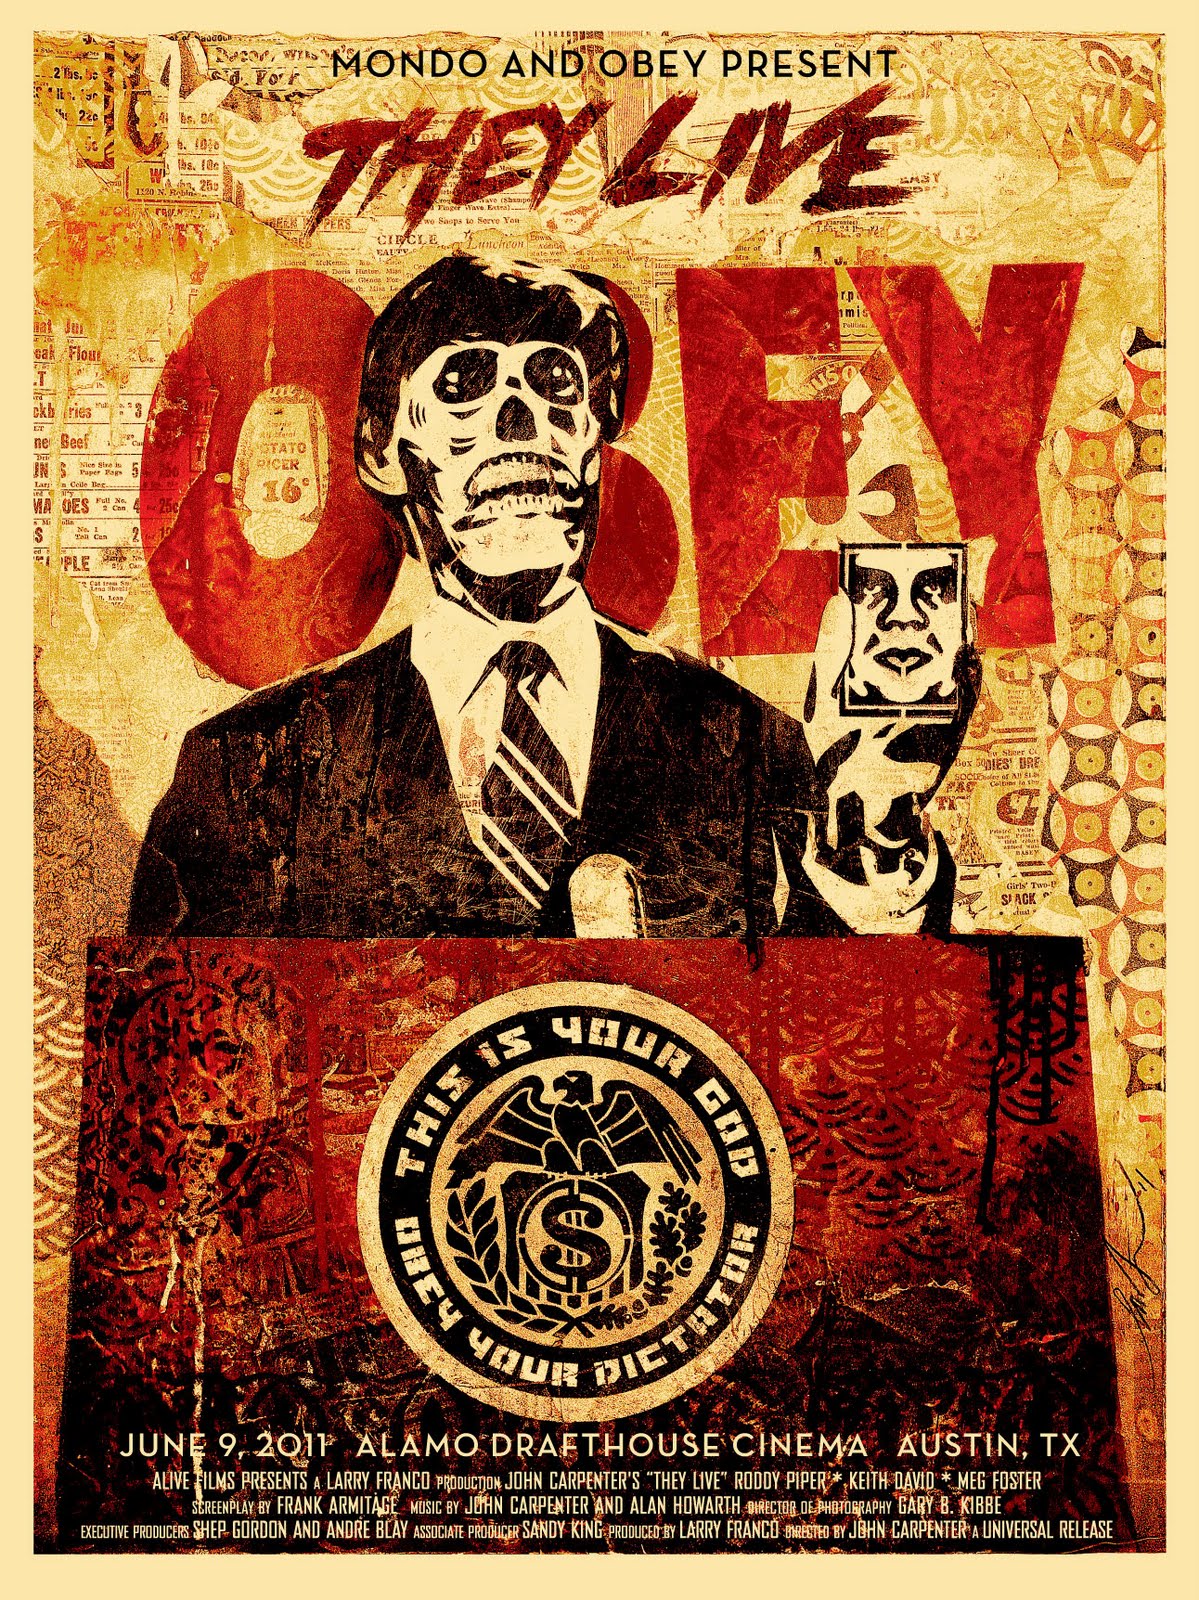 hd wallpapers: Obey Wallpaper For Room